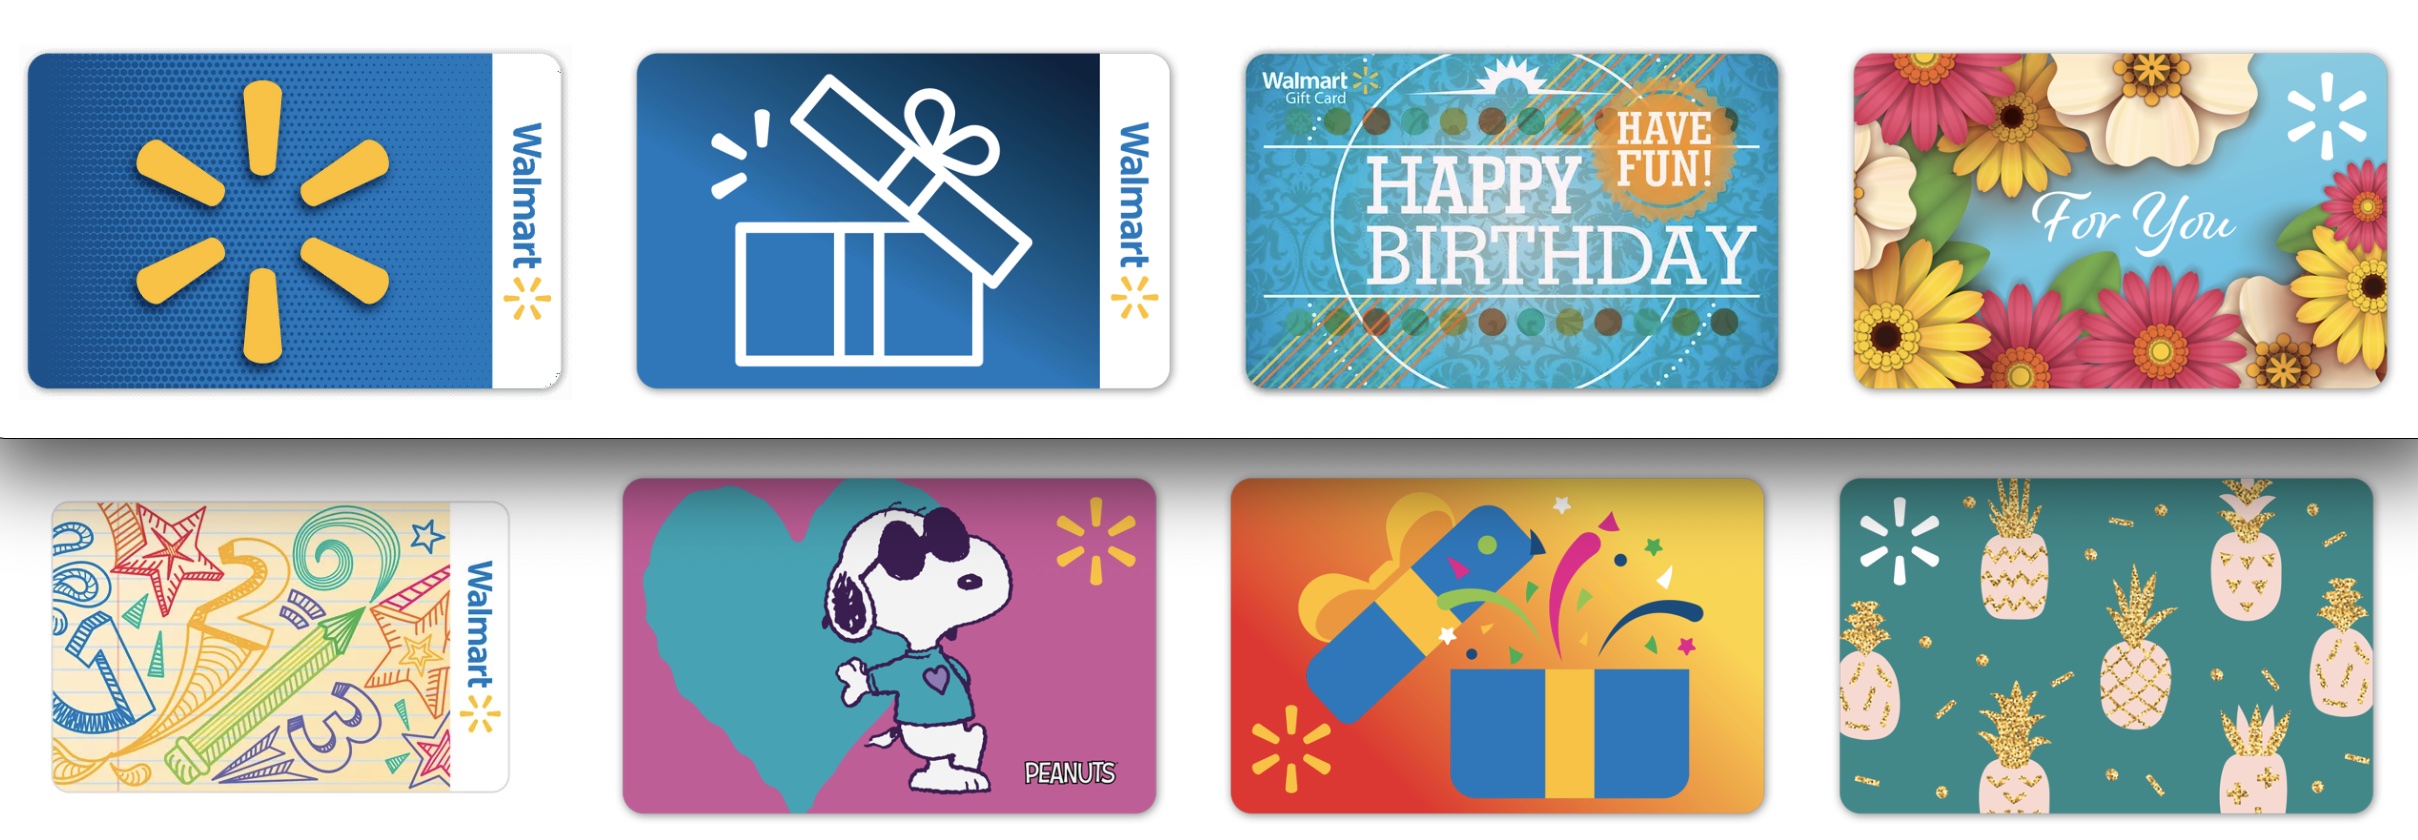 Can You Buy Gift Cards With Walmart Gift Cards?